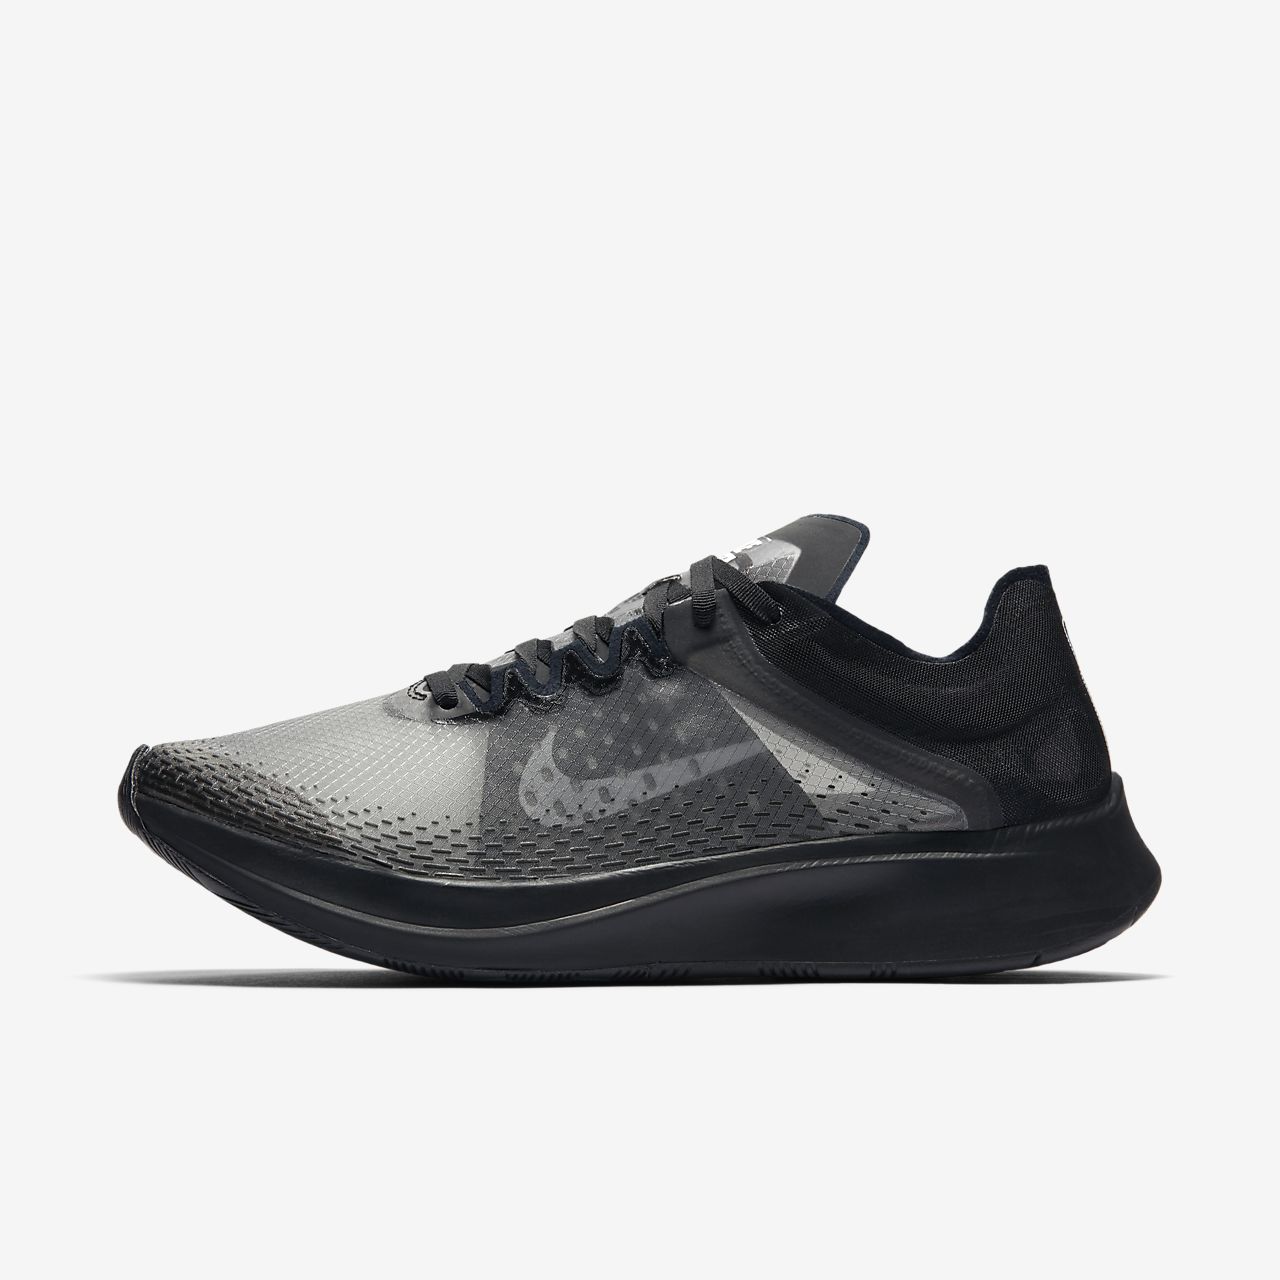 nike artist zoom fly sp fast buy clothes shoes online